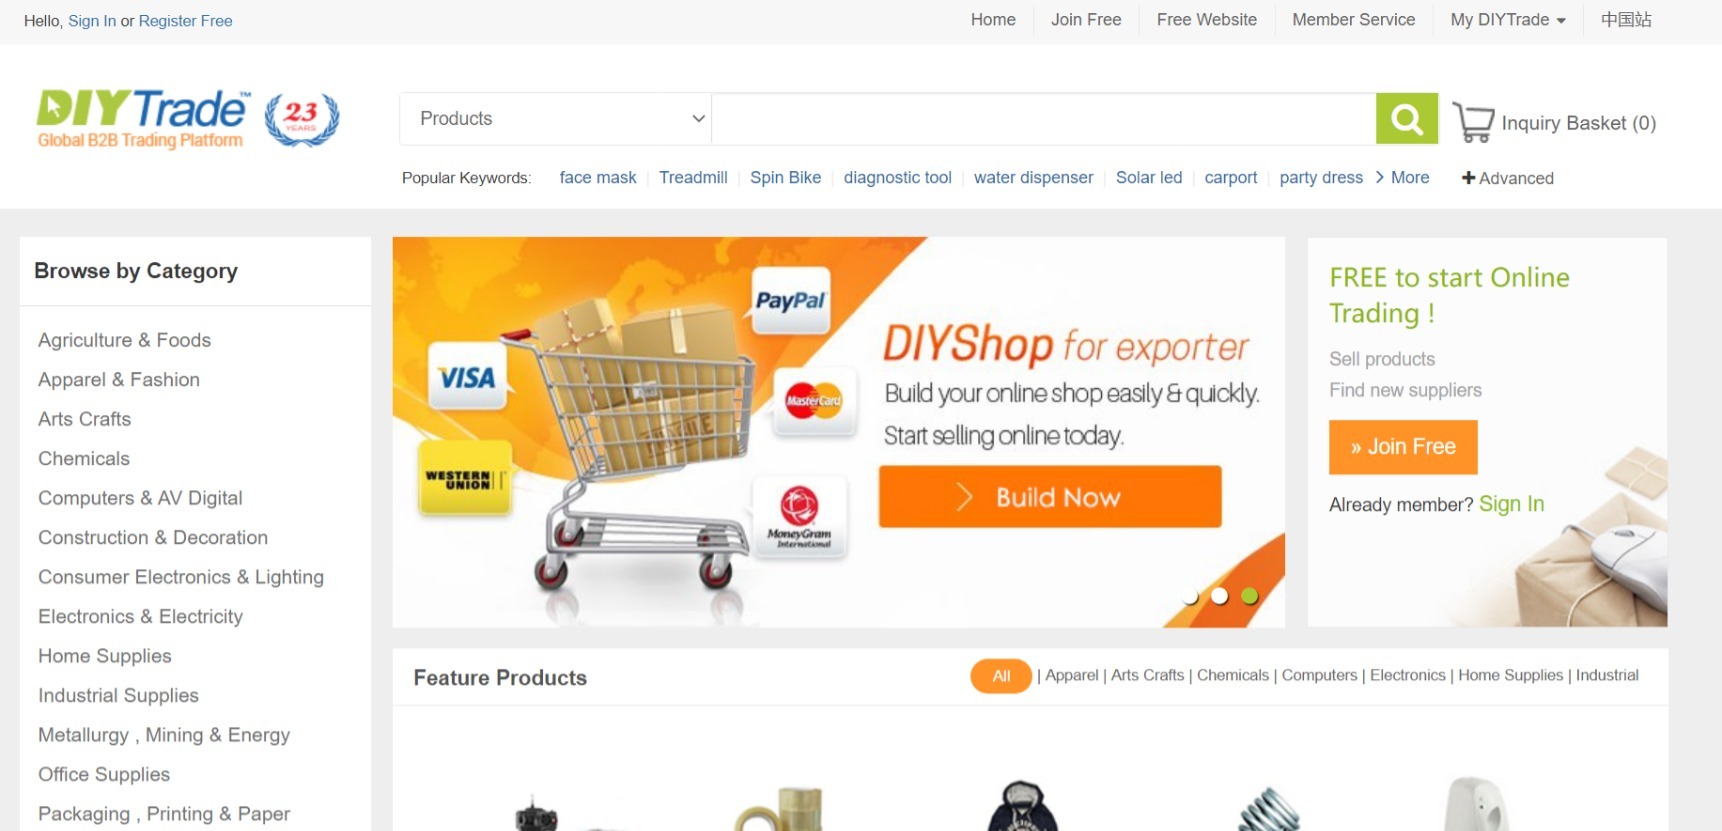 diytrade.com as a wholesale chinese website